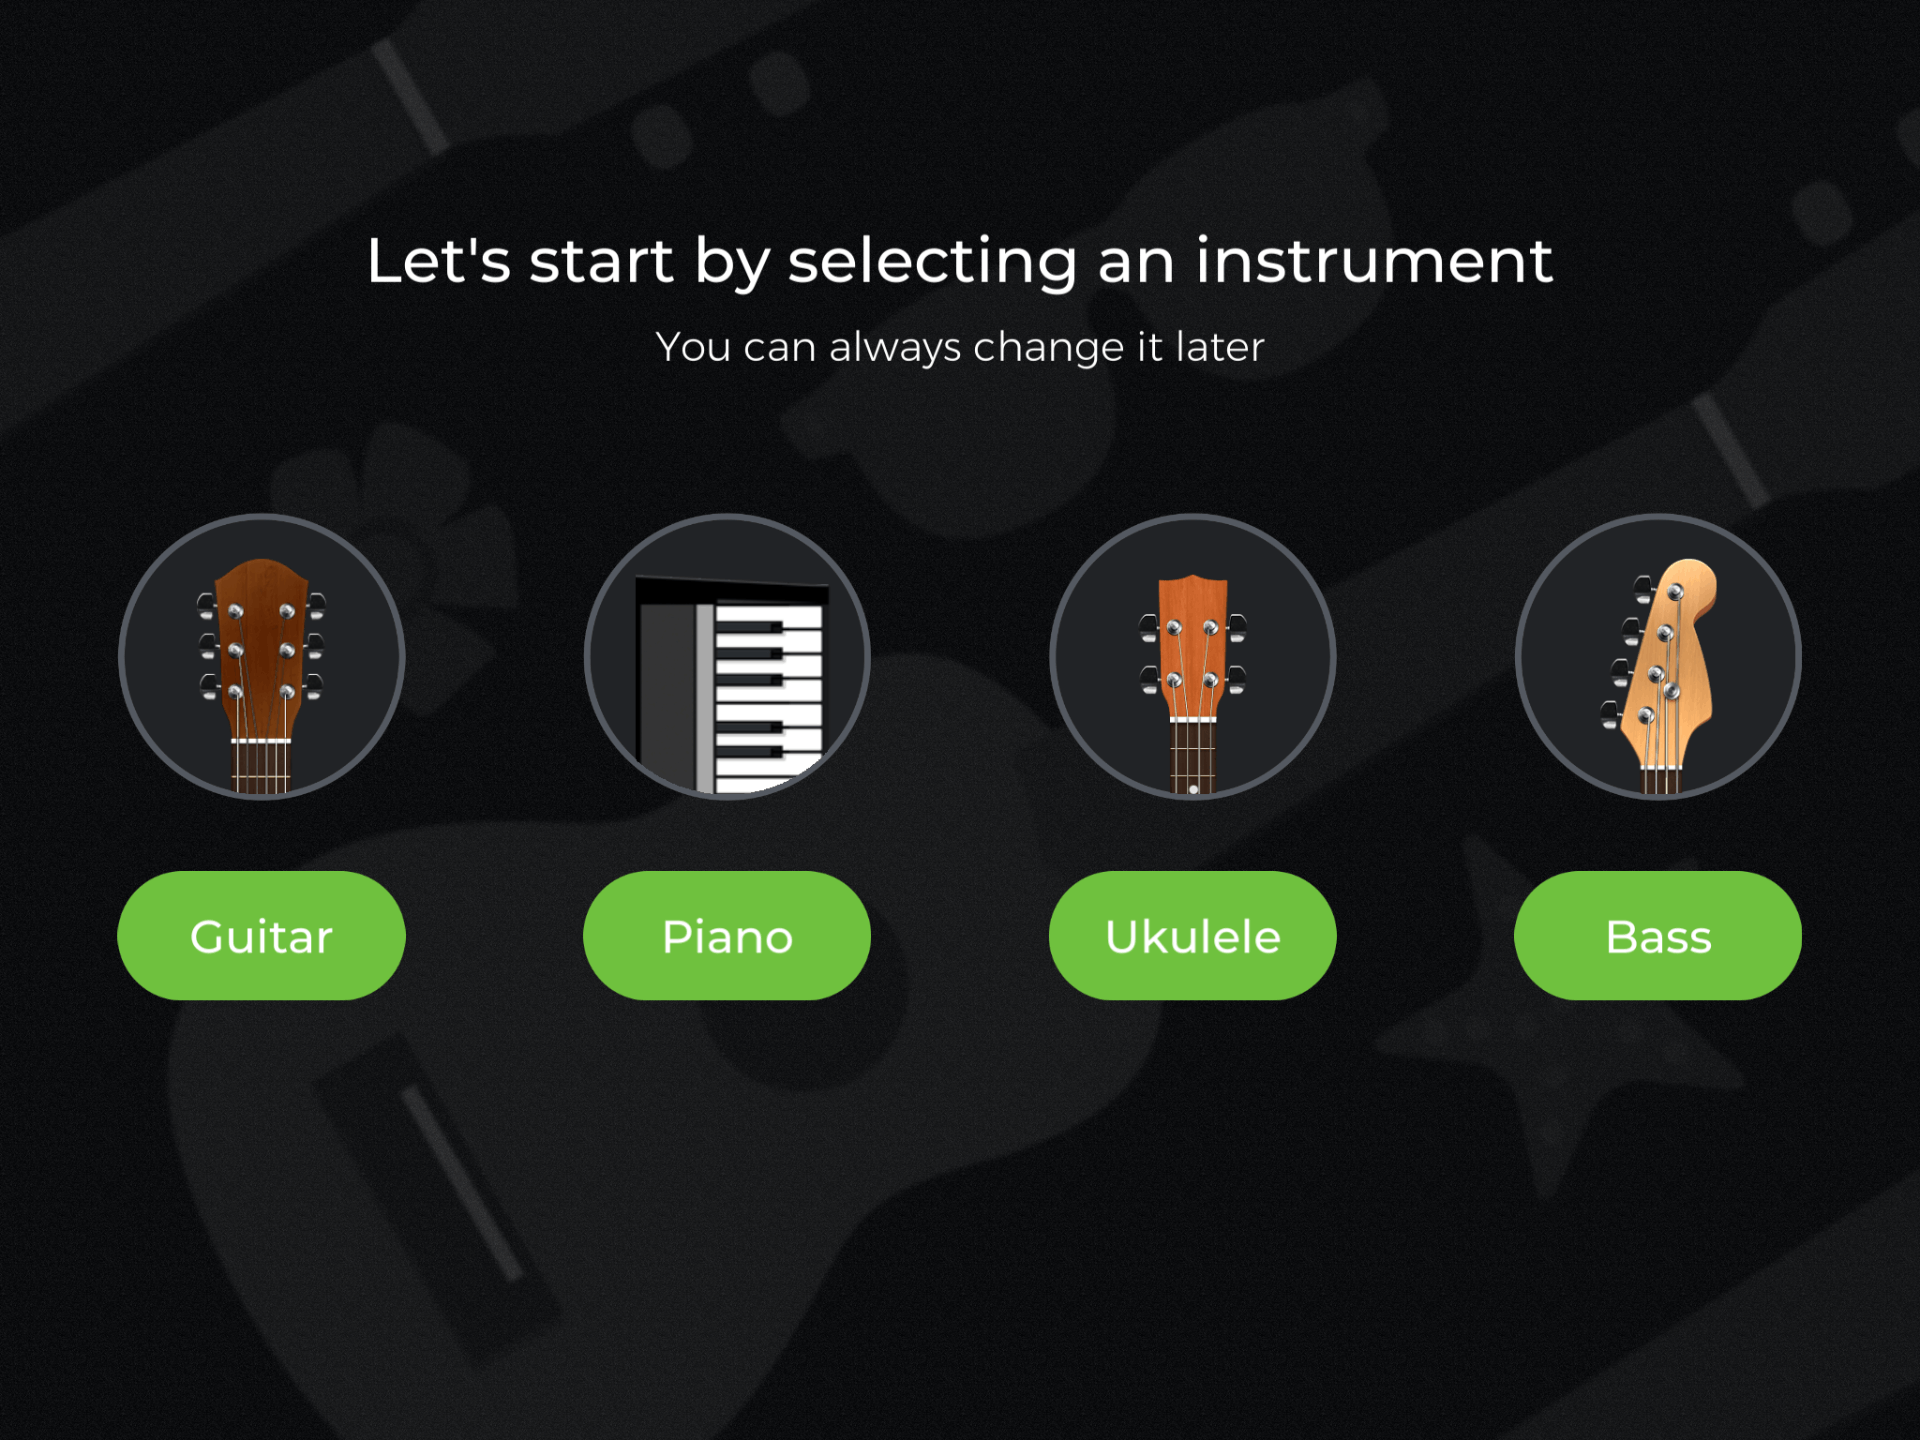 Yousician - The App that Will Teach Users How to Master the Guitar